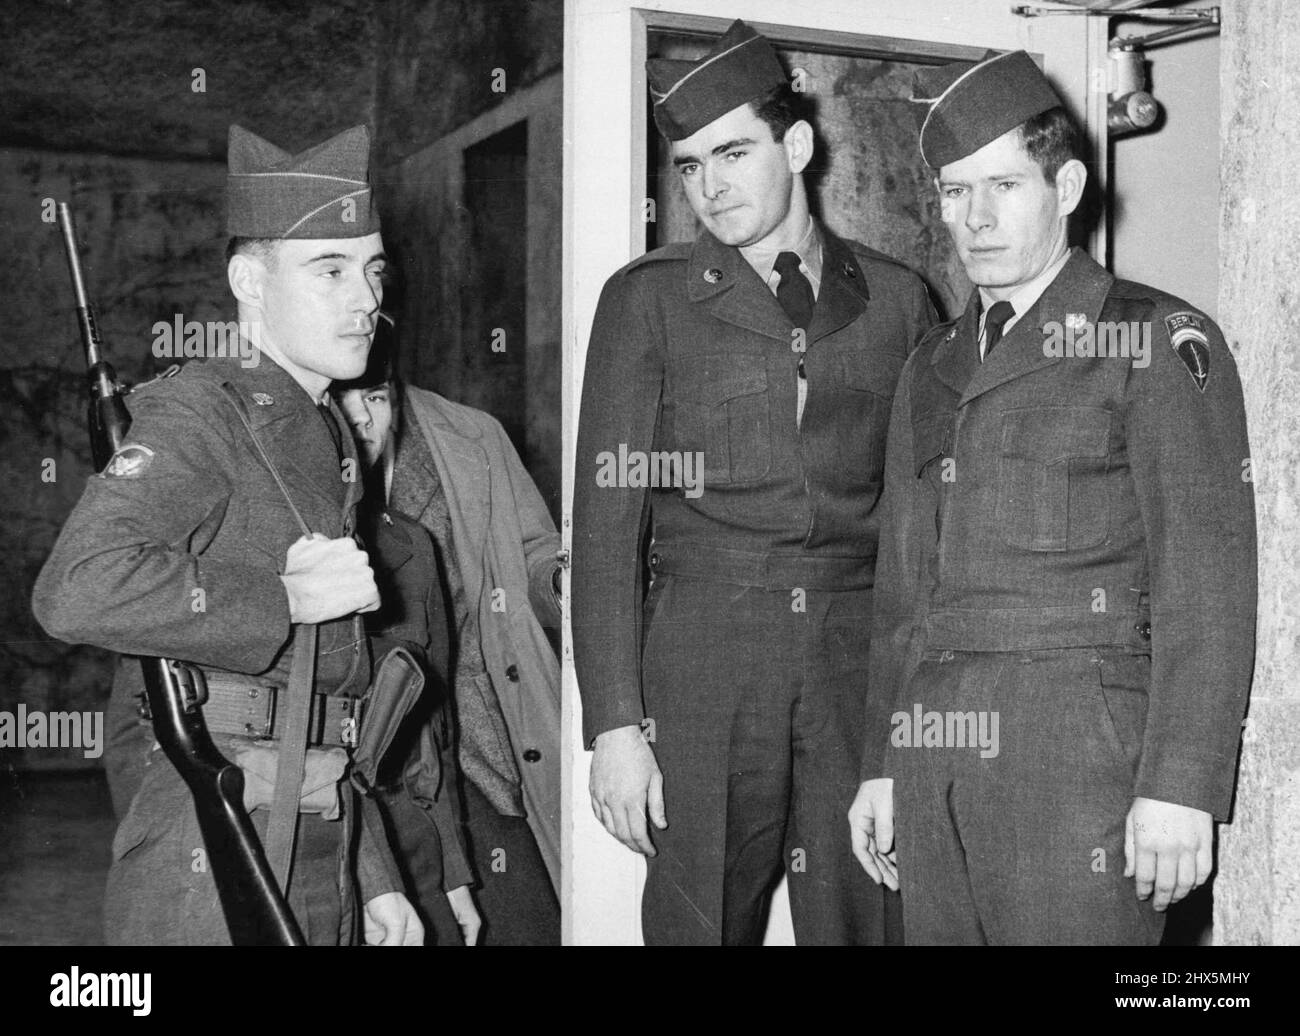 U.S. Soldiers Acquitted After Berlin Incident - Privates Holden and Calbert (left to right) with their escort on their arrival at U.S. Military headquarters in Berlin. Two American soldiers who were detained in East Berlin from December 6th to 10th after being involved in an incident with an East Berlin in Cabaret Artist, were Acquitted by a United States court martial in Berlin on Tuesday Dec. 19th. The accused, Private Holden and Calbert, both pleaded not guilty to disorderly behaviour 'Under Such Circumstances as to bring discredit upon the Armed Forces.' December 21, 1955. (Photo by Paul Stock Photo